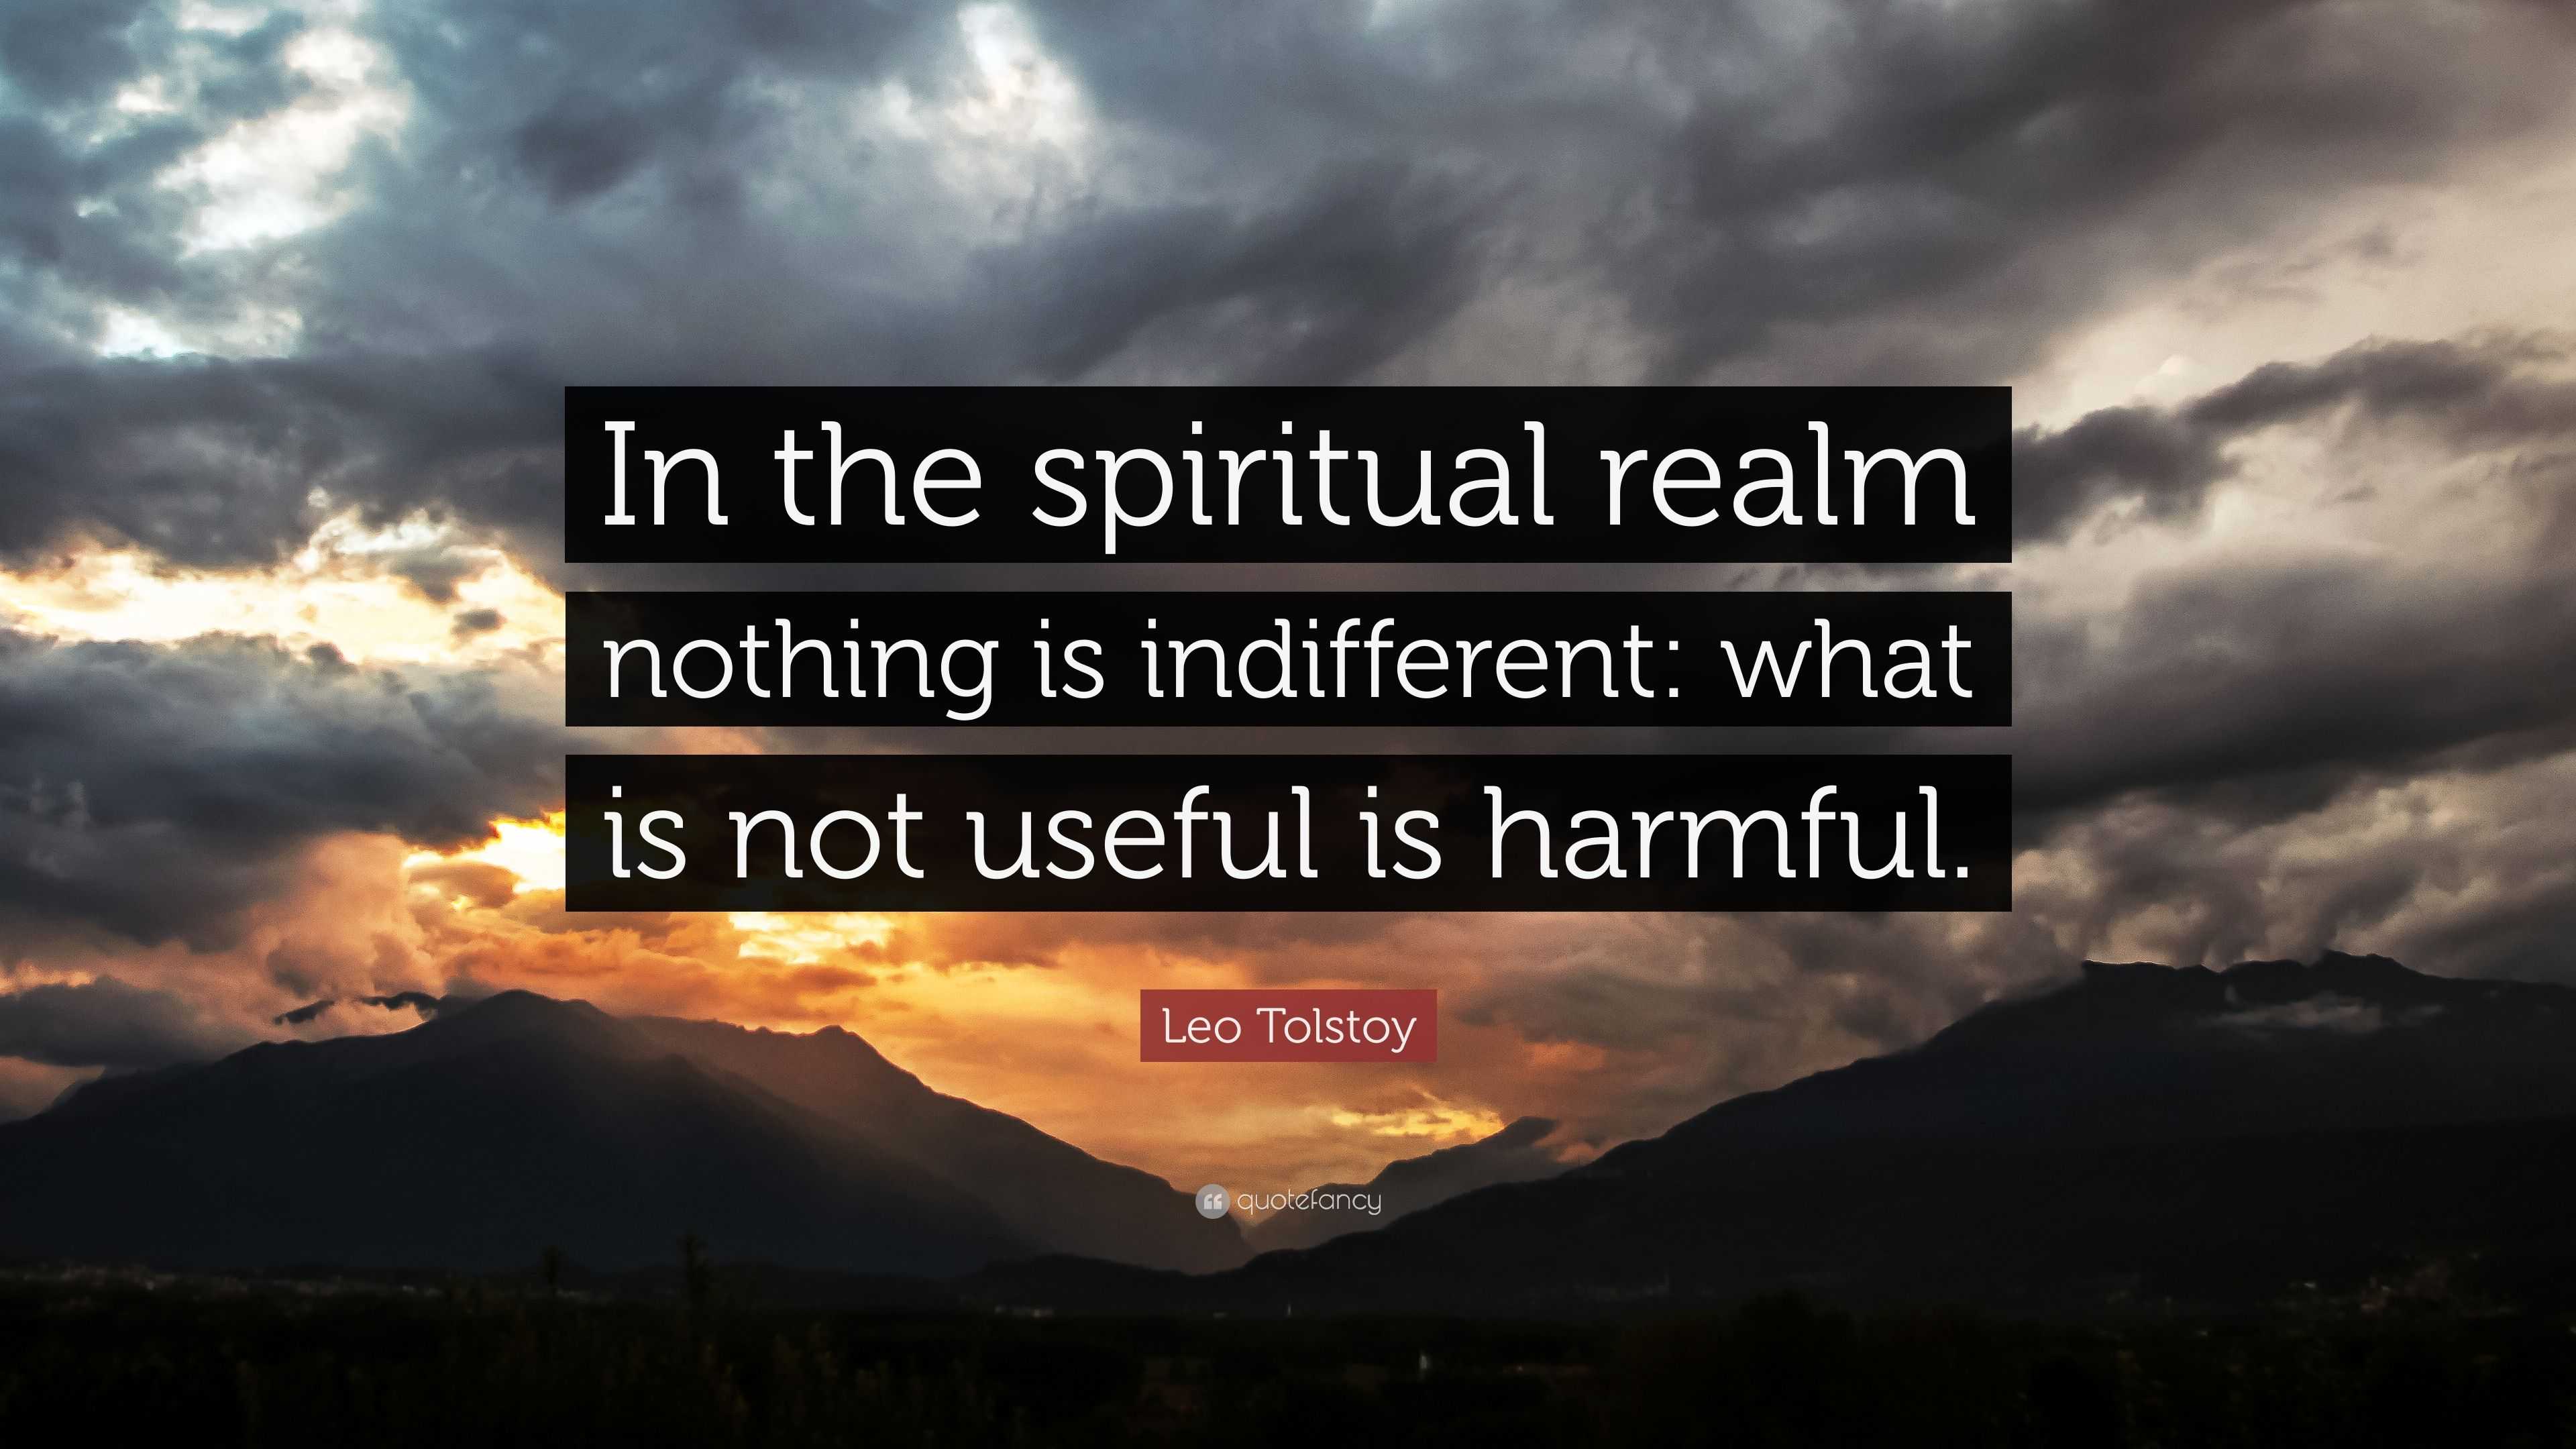 Leo Tolstoy Quote: “In the spiritual realm nothing is indifferent: what ...